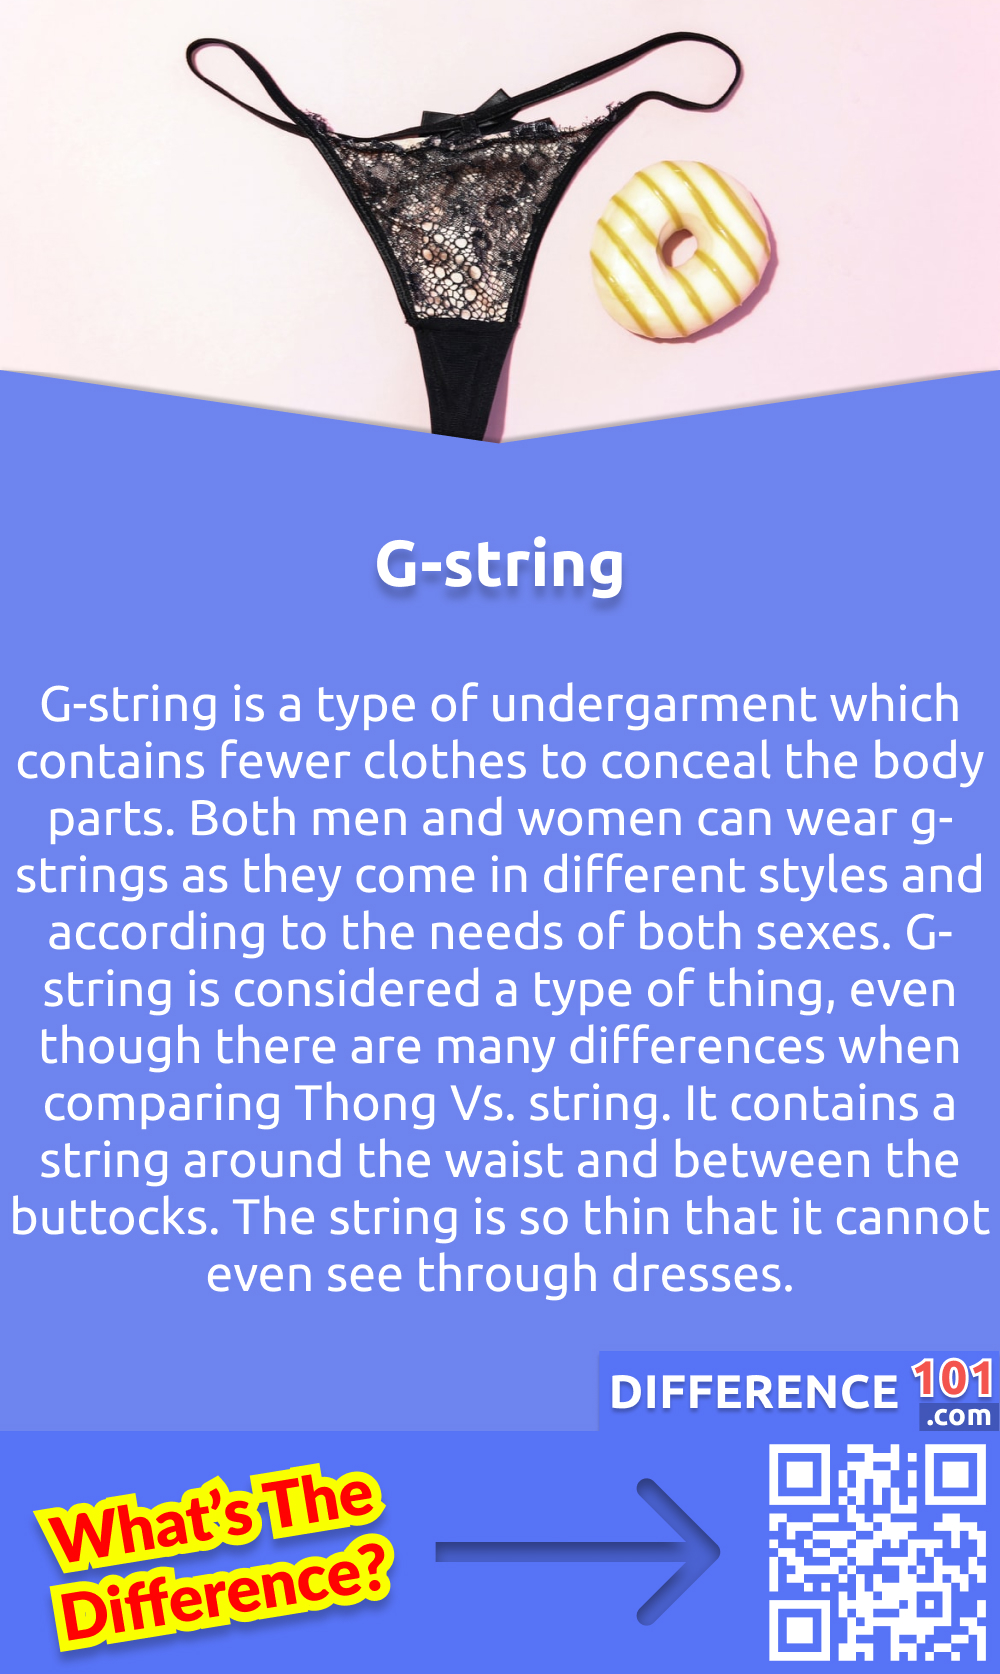 What is G-string? G-string is a type of undergarment which contains fewer clothes to conceal the body parts. Both men and women can wear g-strings as they come in different styles and according to the needs of both sexes. G-string is considered a type of thing, even though there are many differences when comparing Thong Vs. string. It contains a string around the waist and between the buttocks. The string is so thin that it cannot even see through dresses.